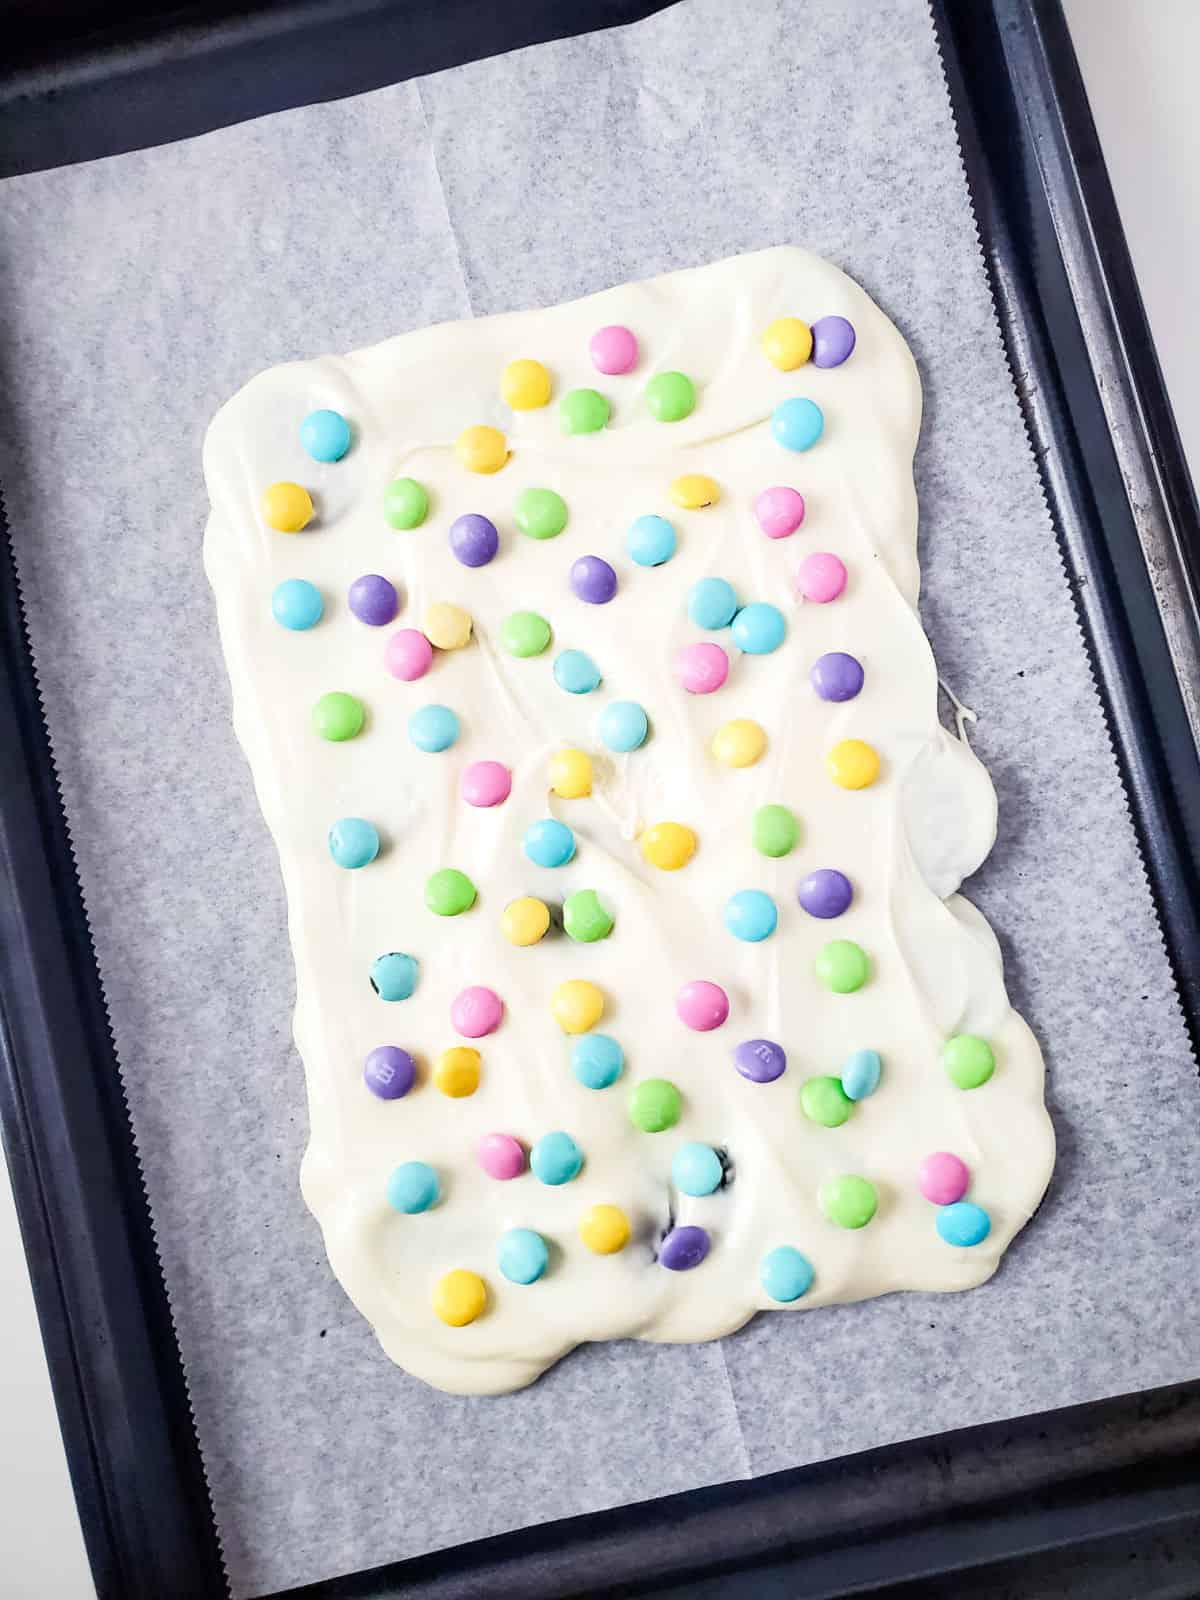 White chocolate with colorful candies on a baking sheet.